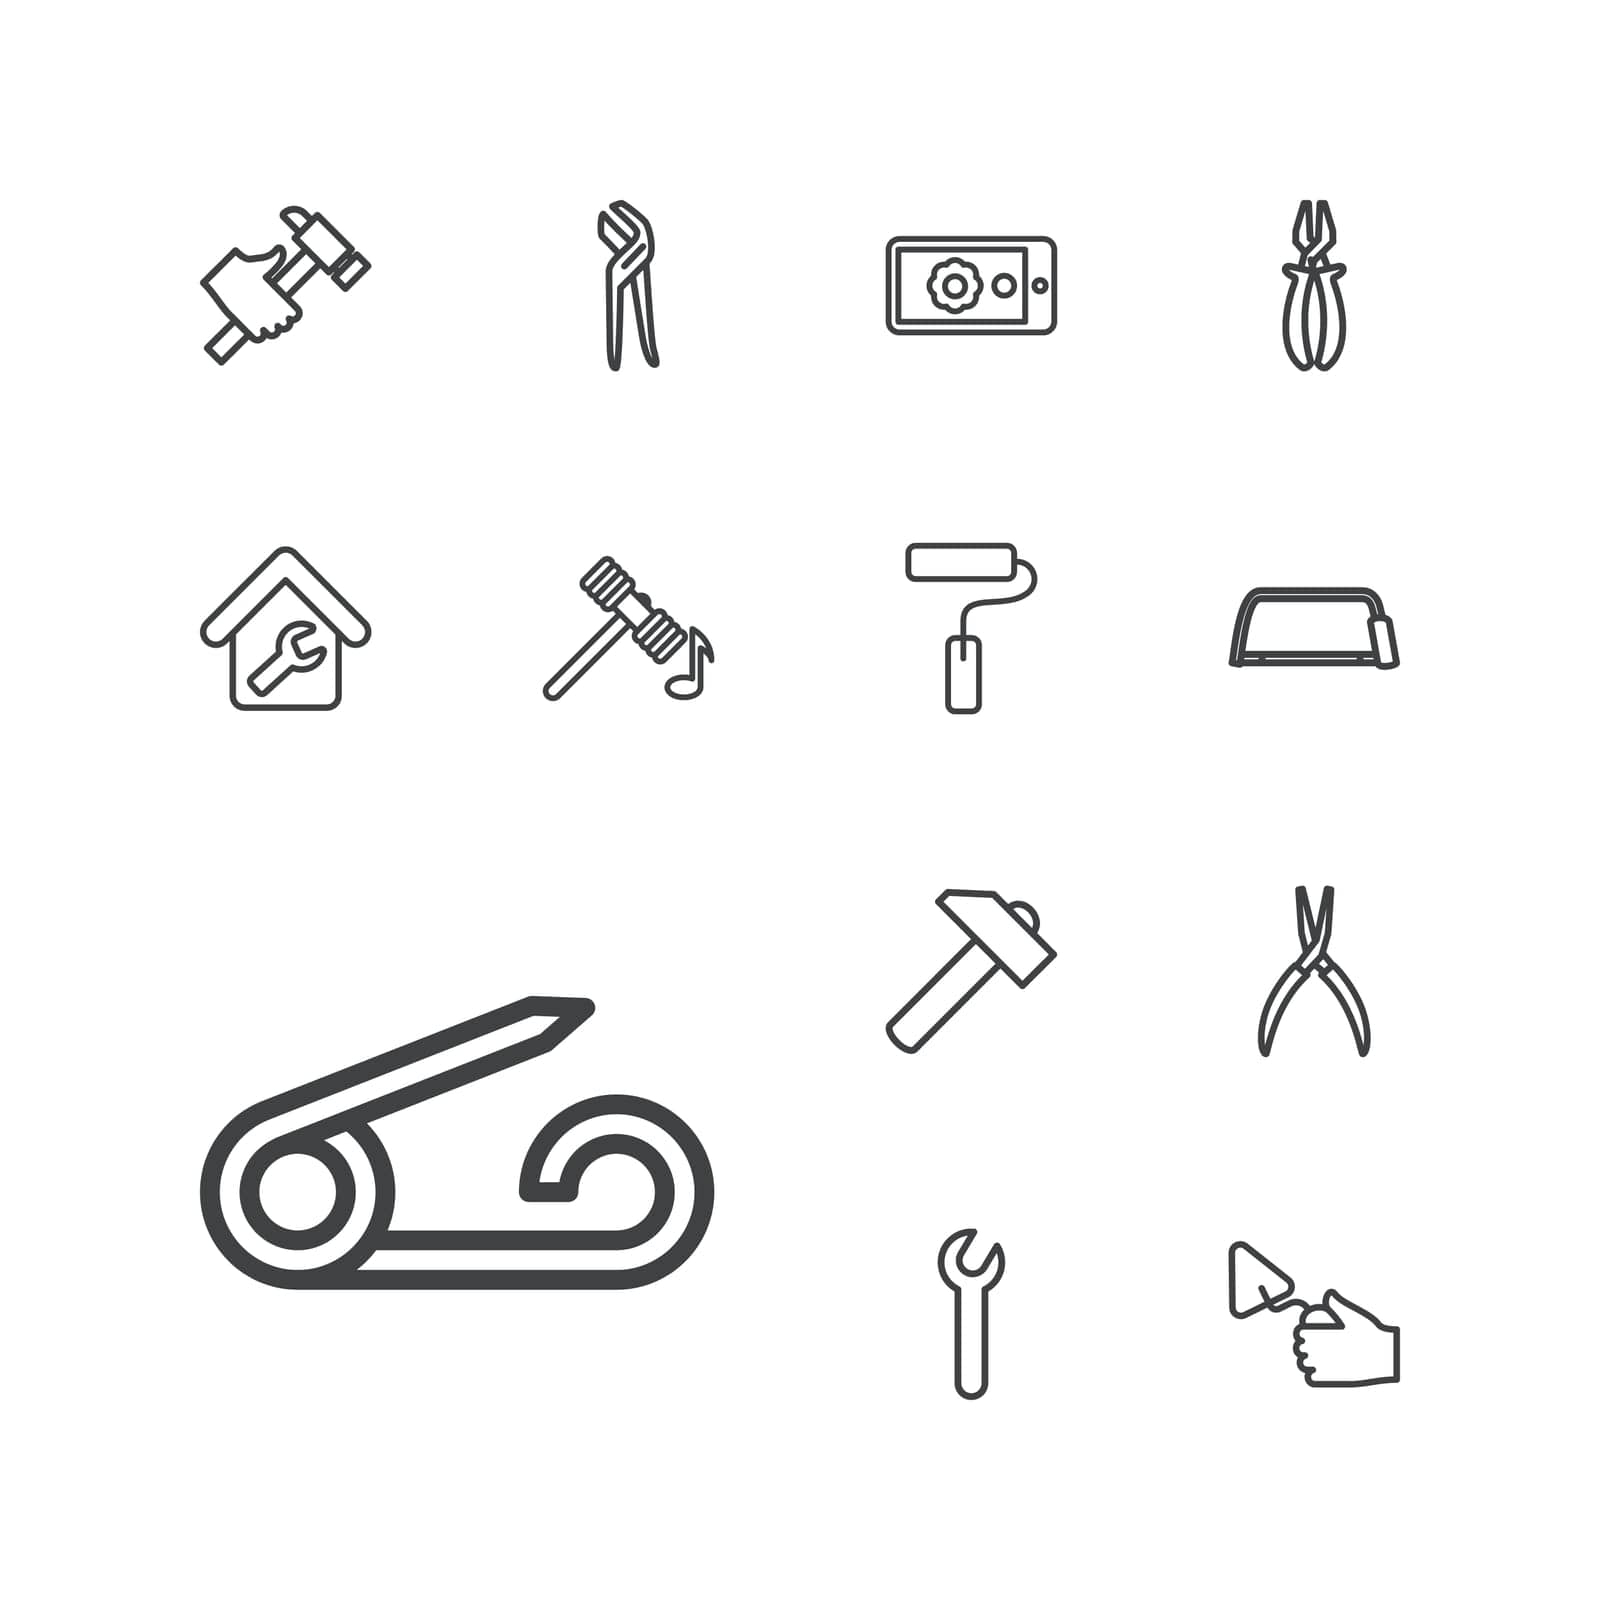 symbol,repair,hummer,hammer,concept,icon,sign,isolated,paint,instrument,industry,pin,white,fix,web,flat,design,pliers,construction,vector,hacksaw,graphic,hand,element,hardware,on,trowel,set,work,display,metal,equipment,tool,home,wrench,background,service,silhouette,illustration,roller,object,gear